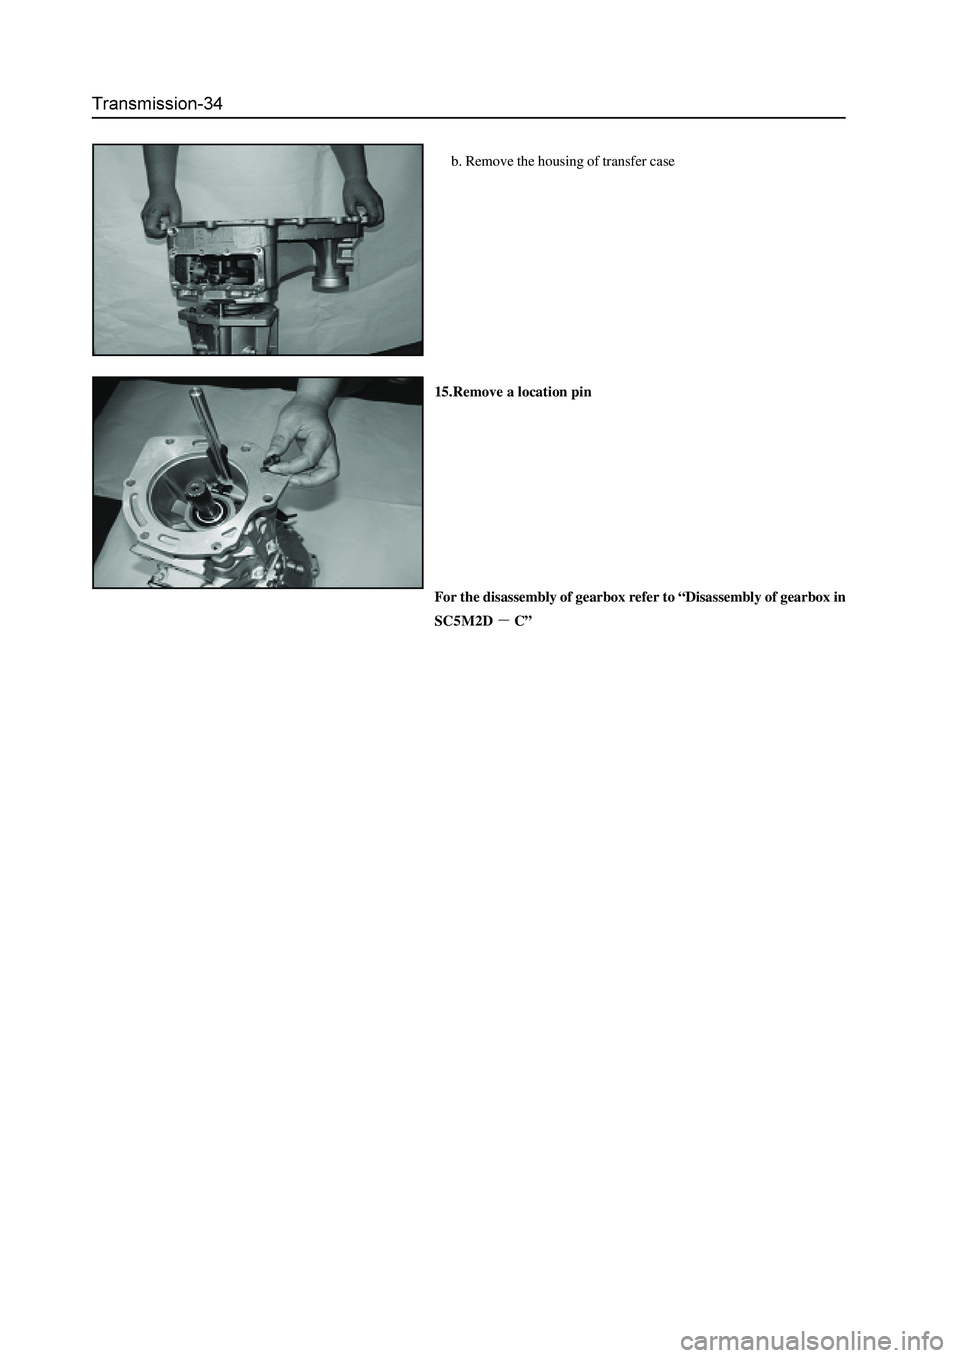 GREAT WALL HOVER 2006  Service Repair Manual b. Remove the housing of transfer case
15.Remove a location pin
For the disassembly of gearbox refer to “Disassembly of gearbox in
SC5M2D
C” 